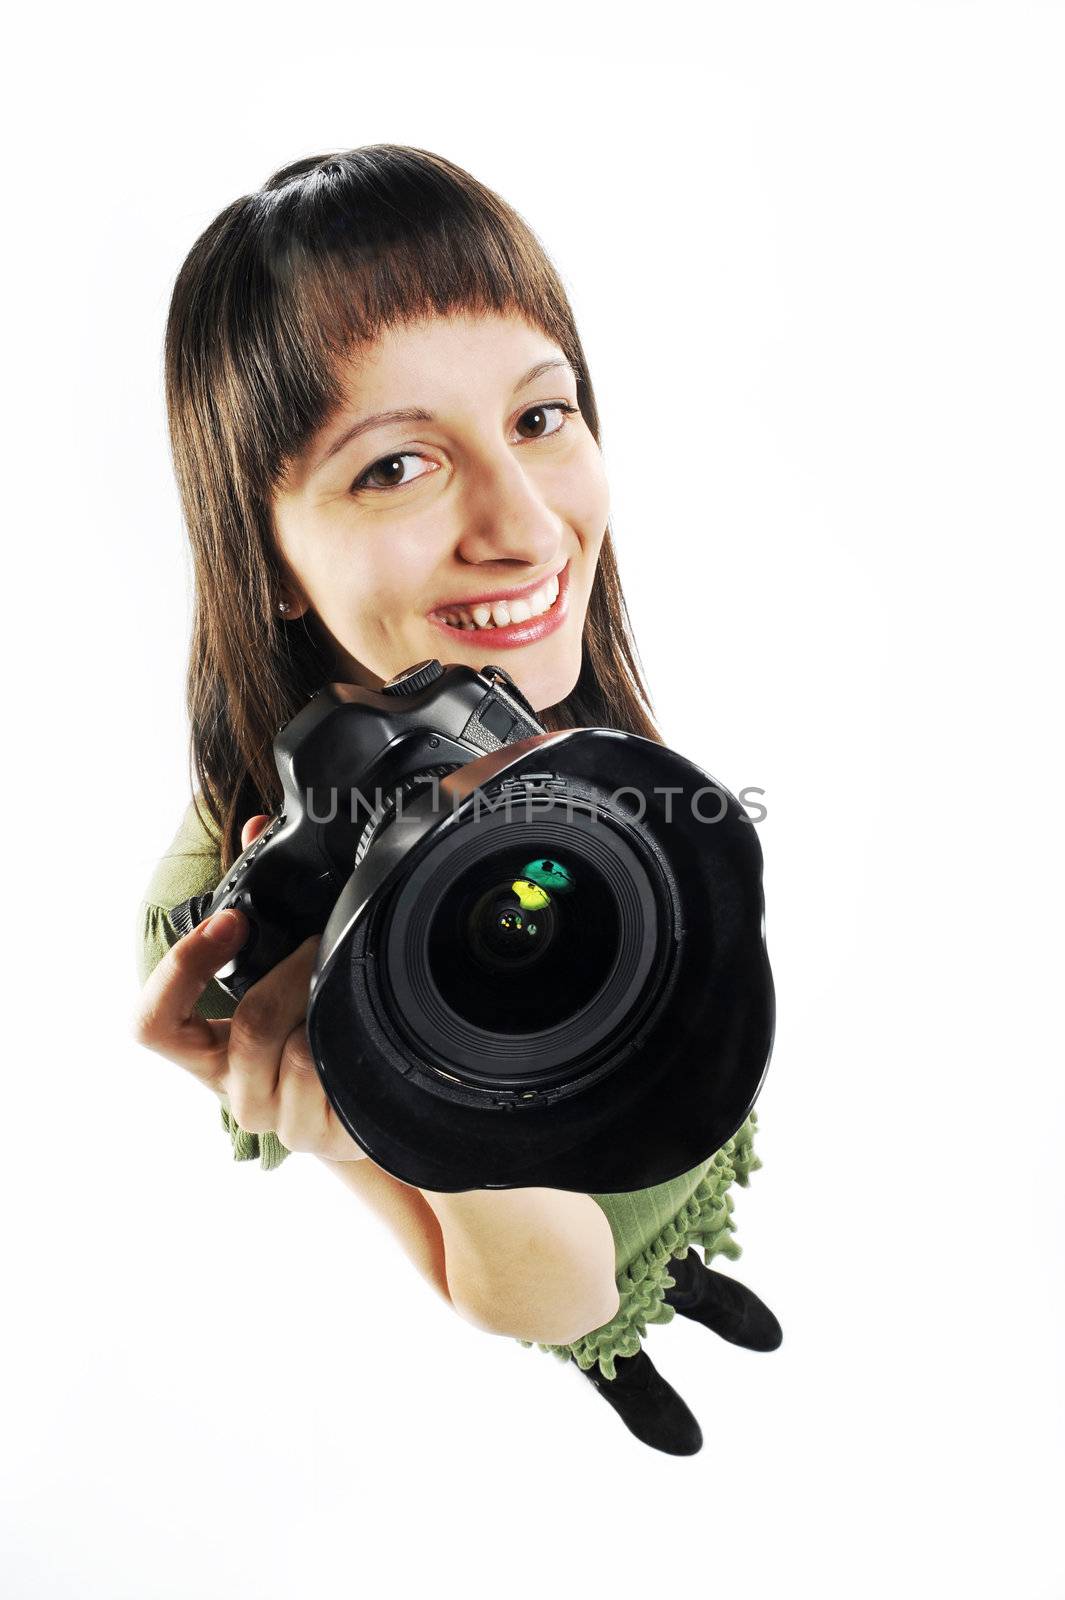 A young girl holds up a camera.
similar photographer pictures from my portfolio